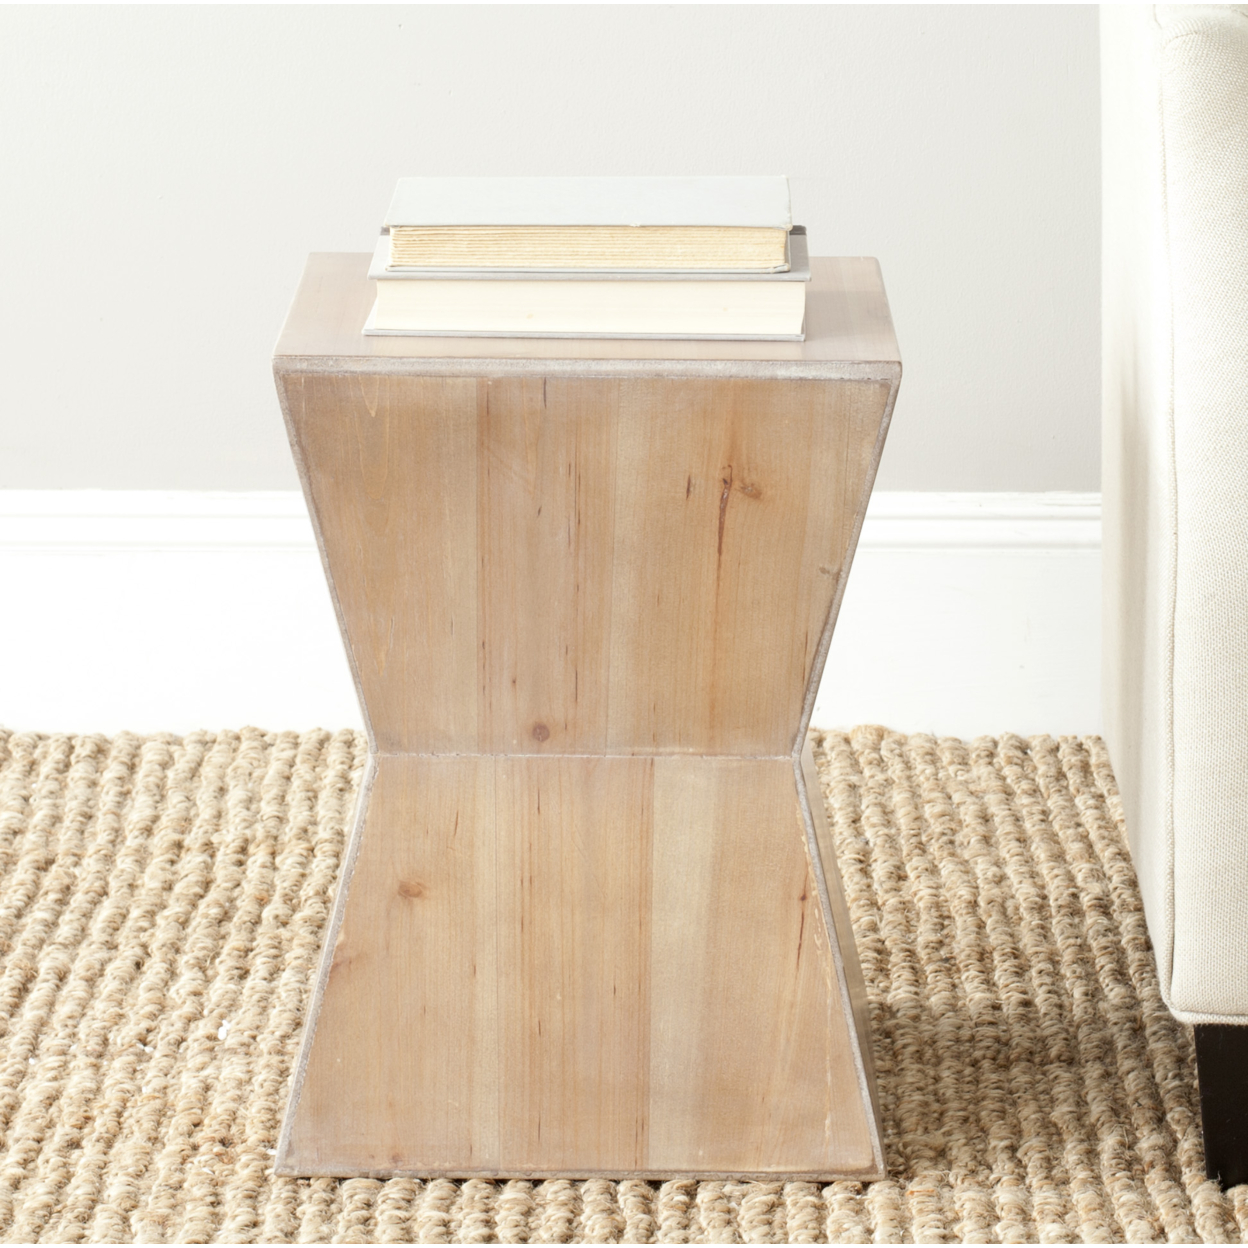 SAFAVIEH Lotem Curved Square Top Accent Table Honey Natural